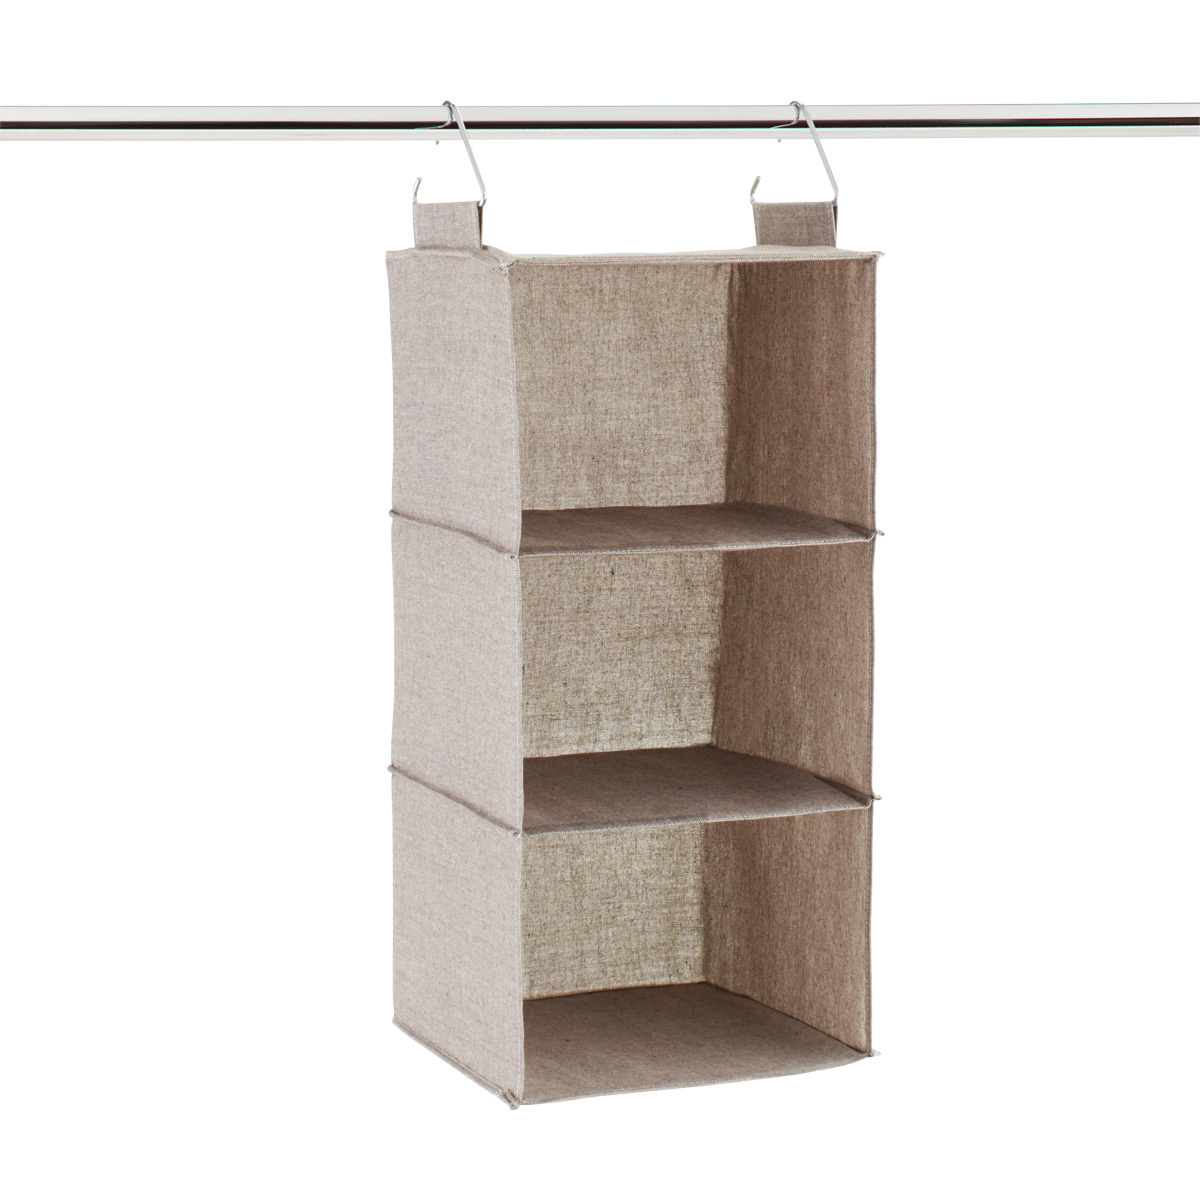 https://www.containerstore.com/catalogimages/314425/10071579-hanging-canvas-organizer-3-.jpg